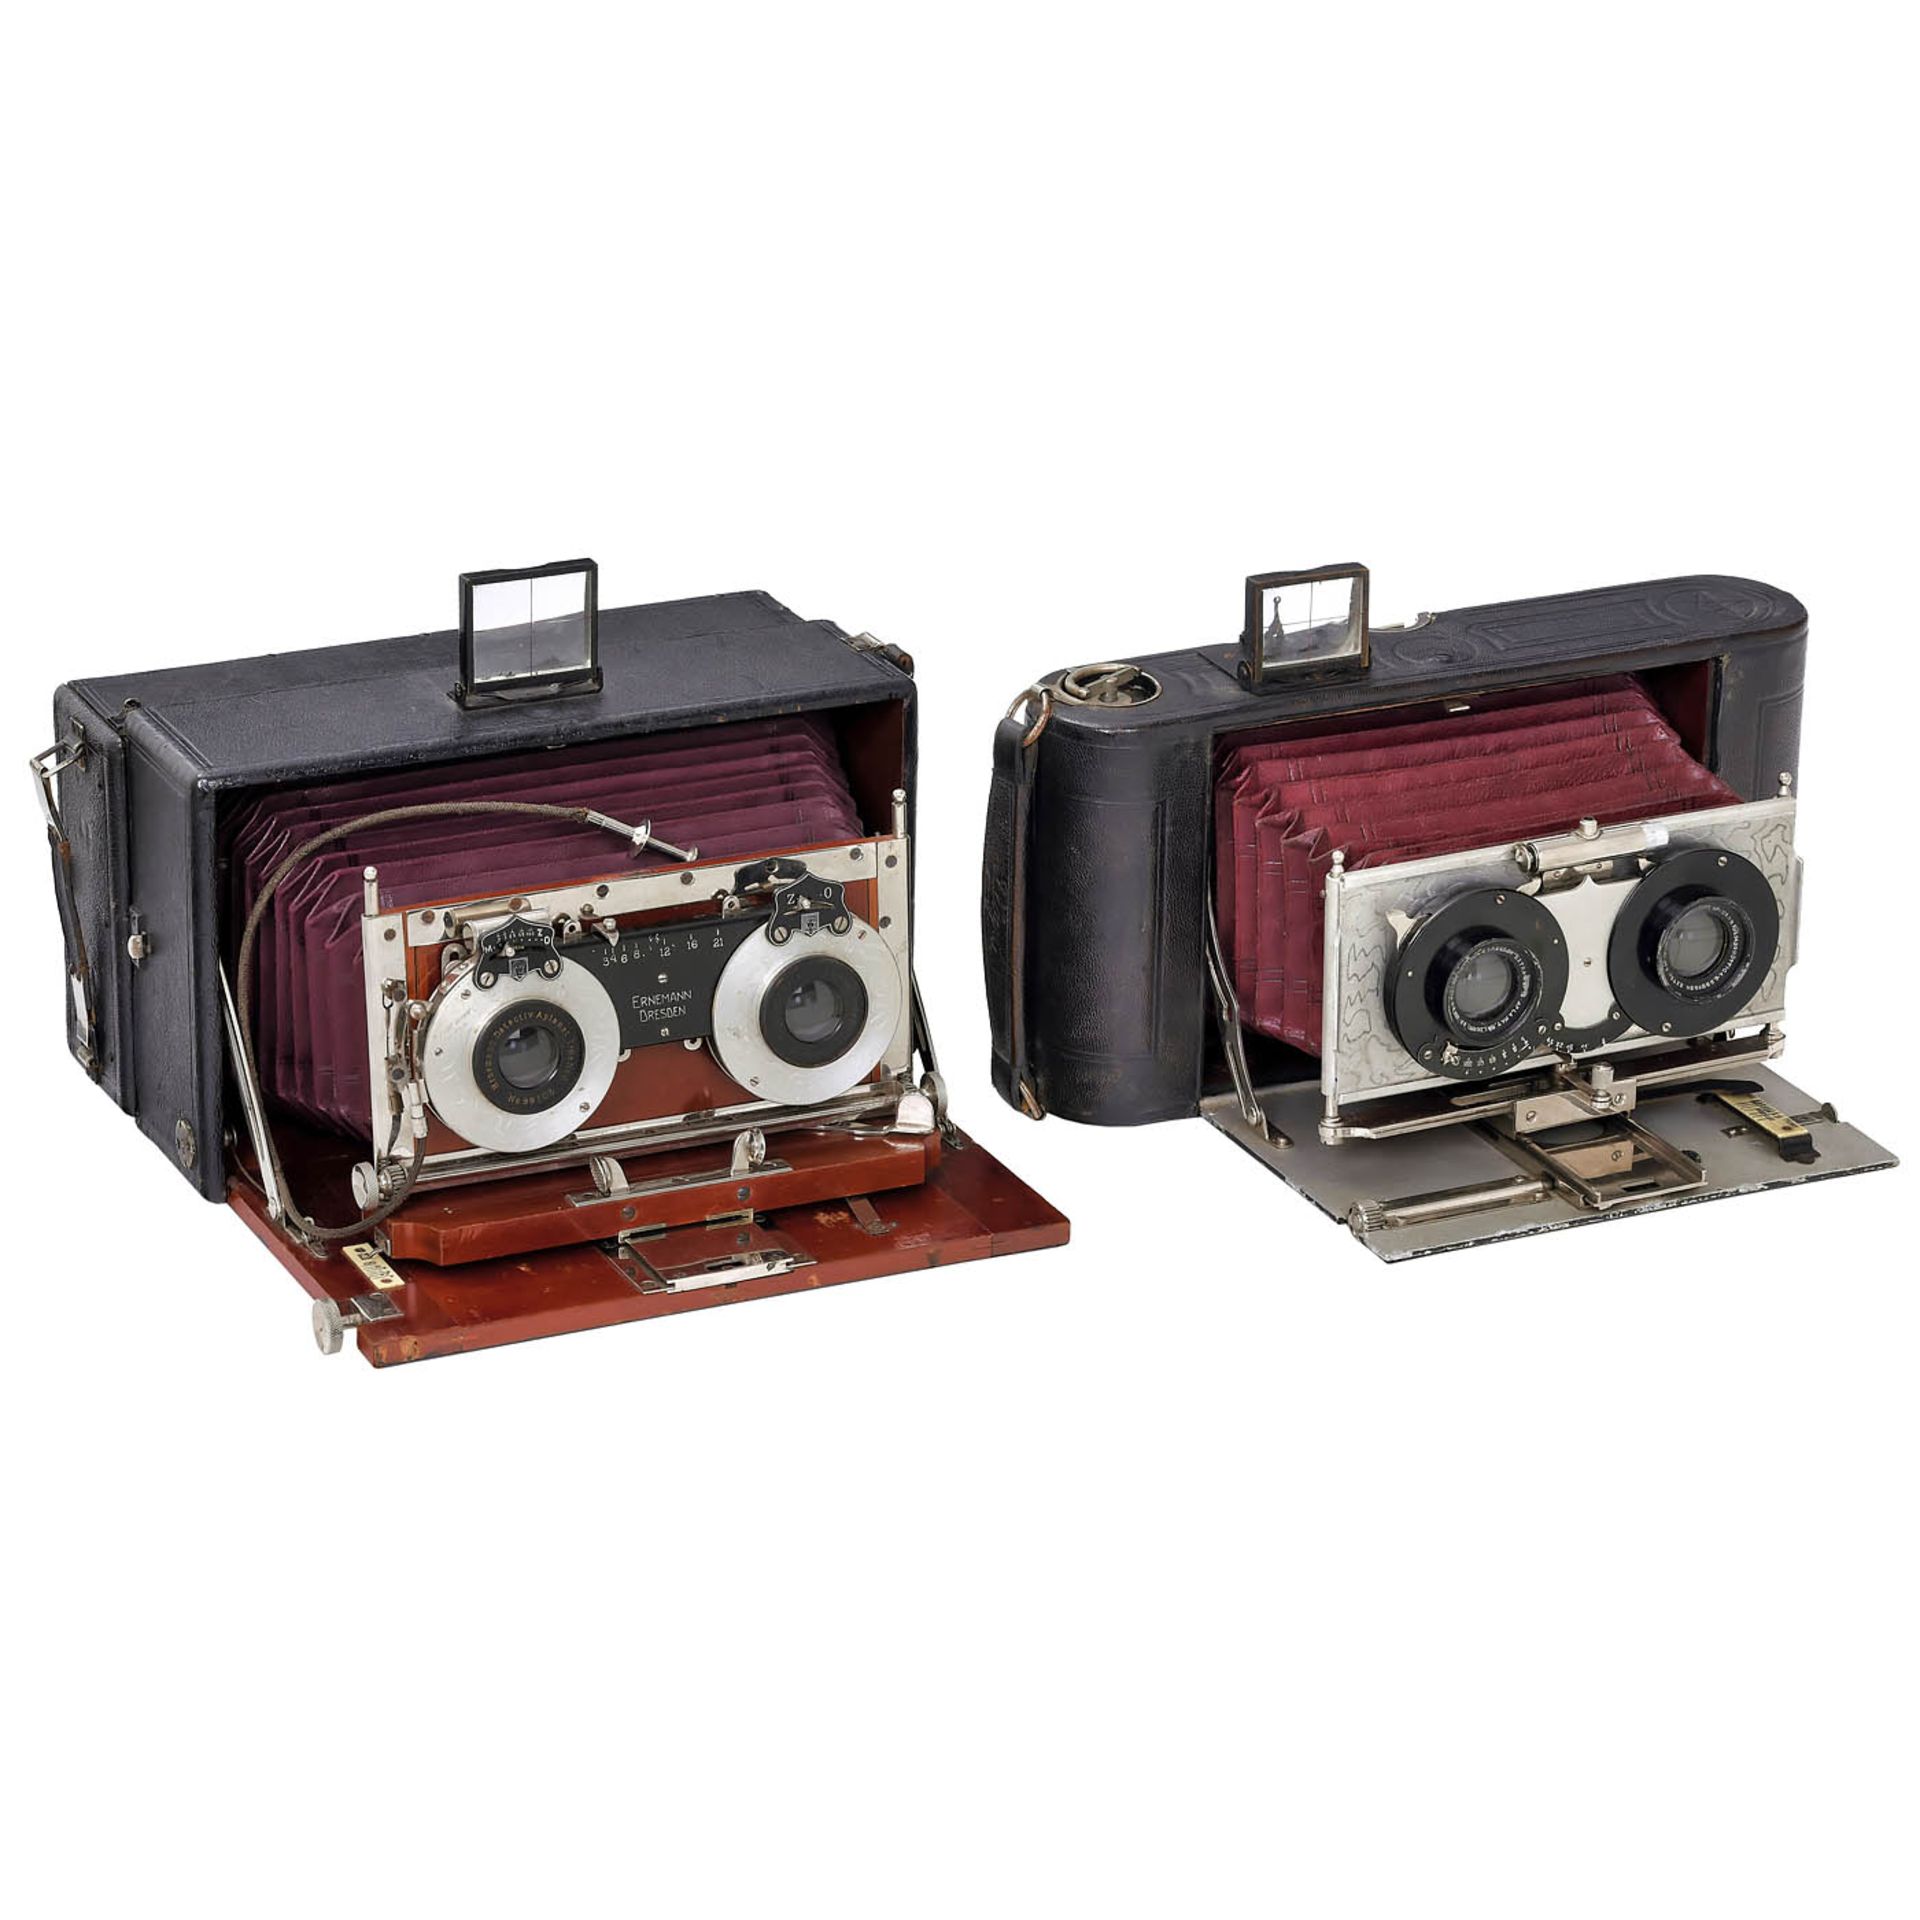 Ernemann Heag IV Stereoskop and Lloyd Stereo-Panorama Cameras, c. 1910